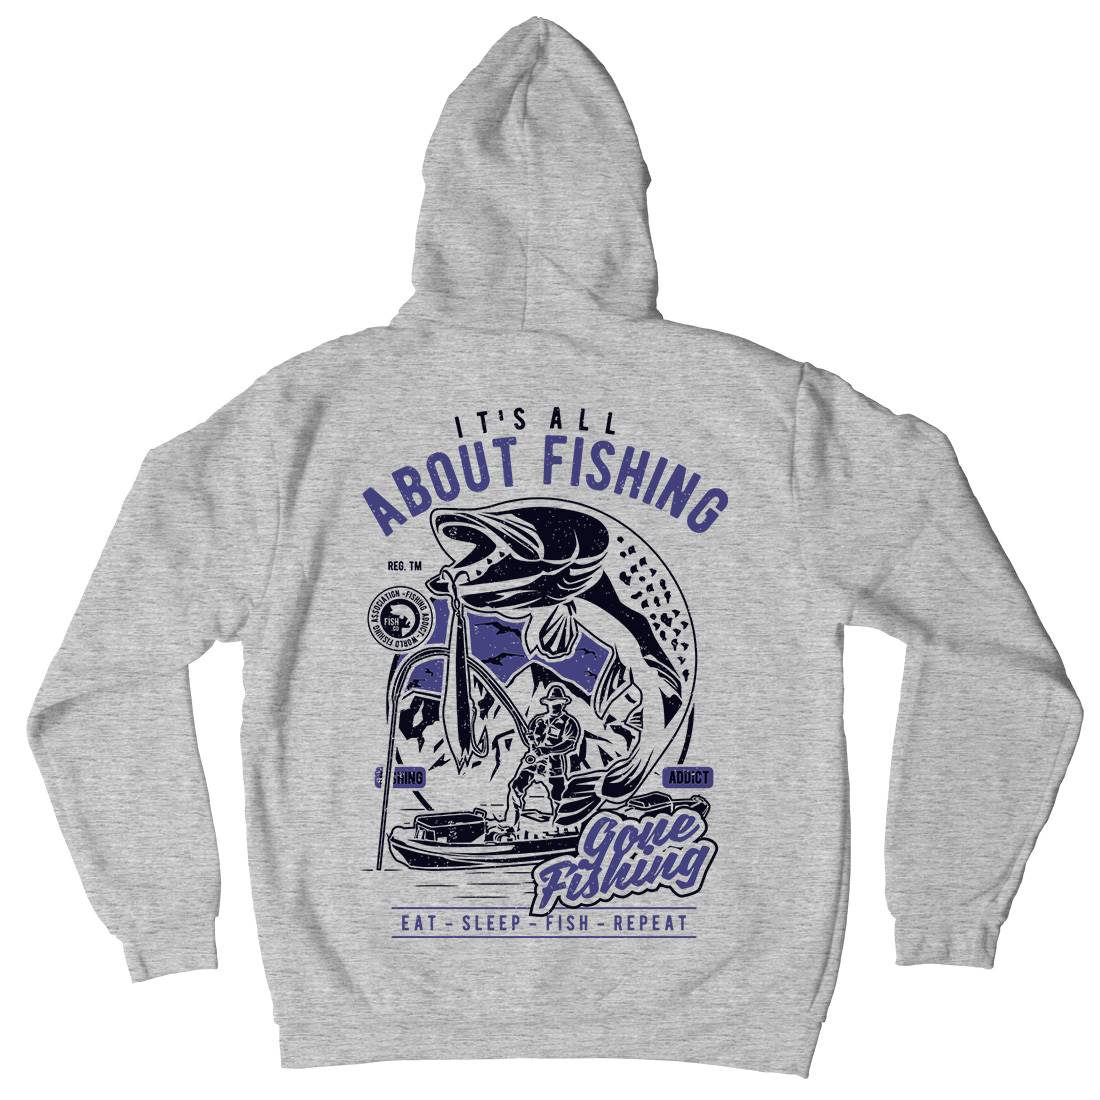 All About Mens Hoodie With Pocket Fishing A604